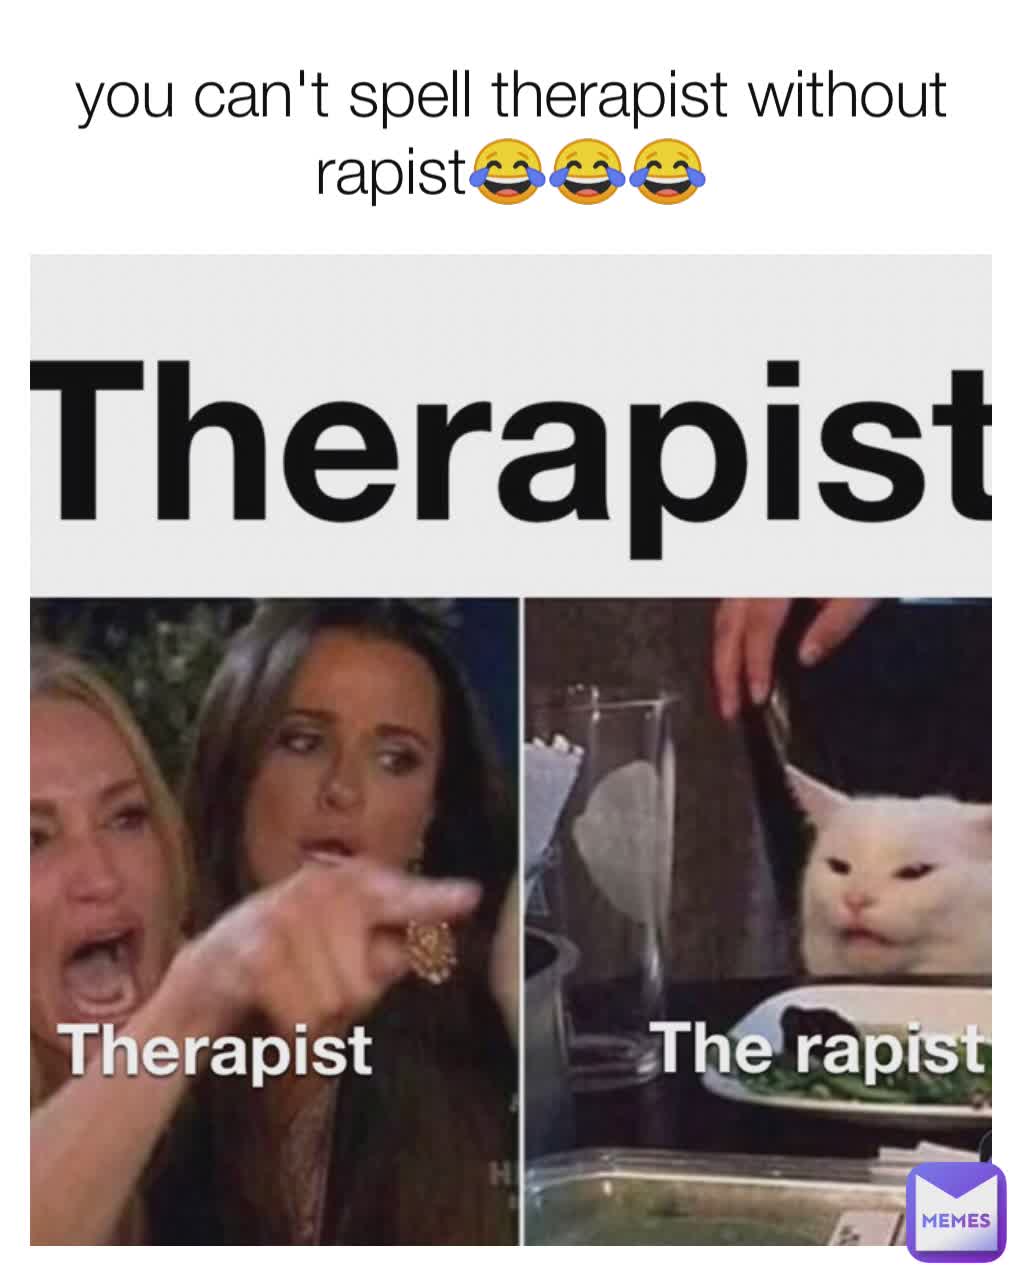 you can't spell therapist without rapist😂😂😂